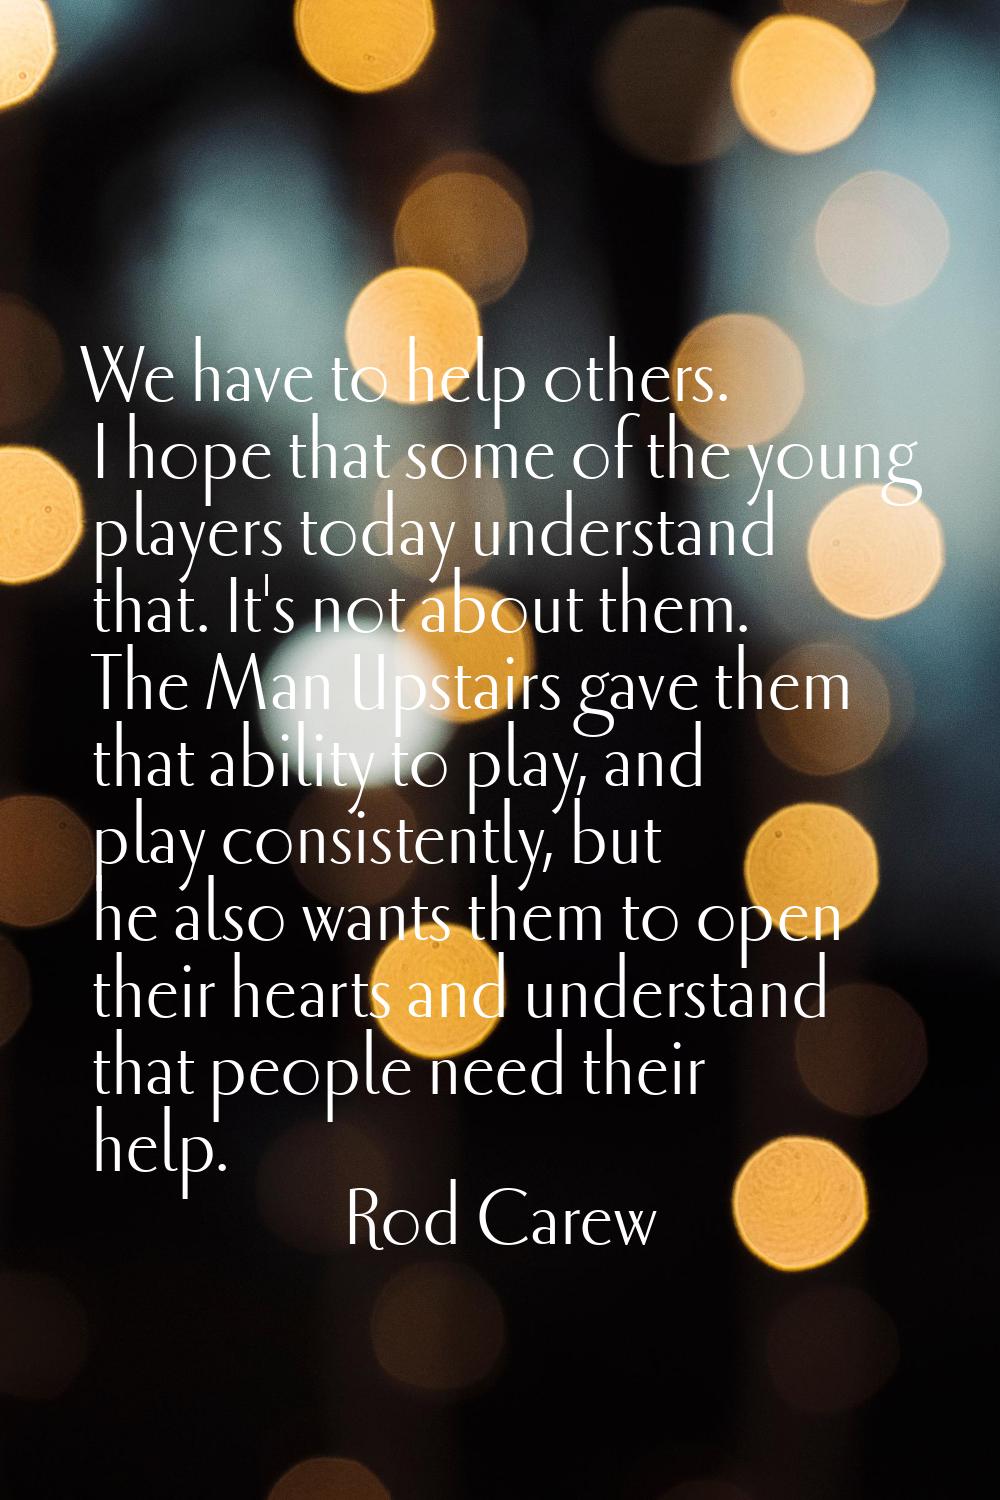 We have to help others. I hope that some of the young players today understand that. It's not about